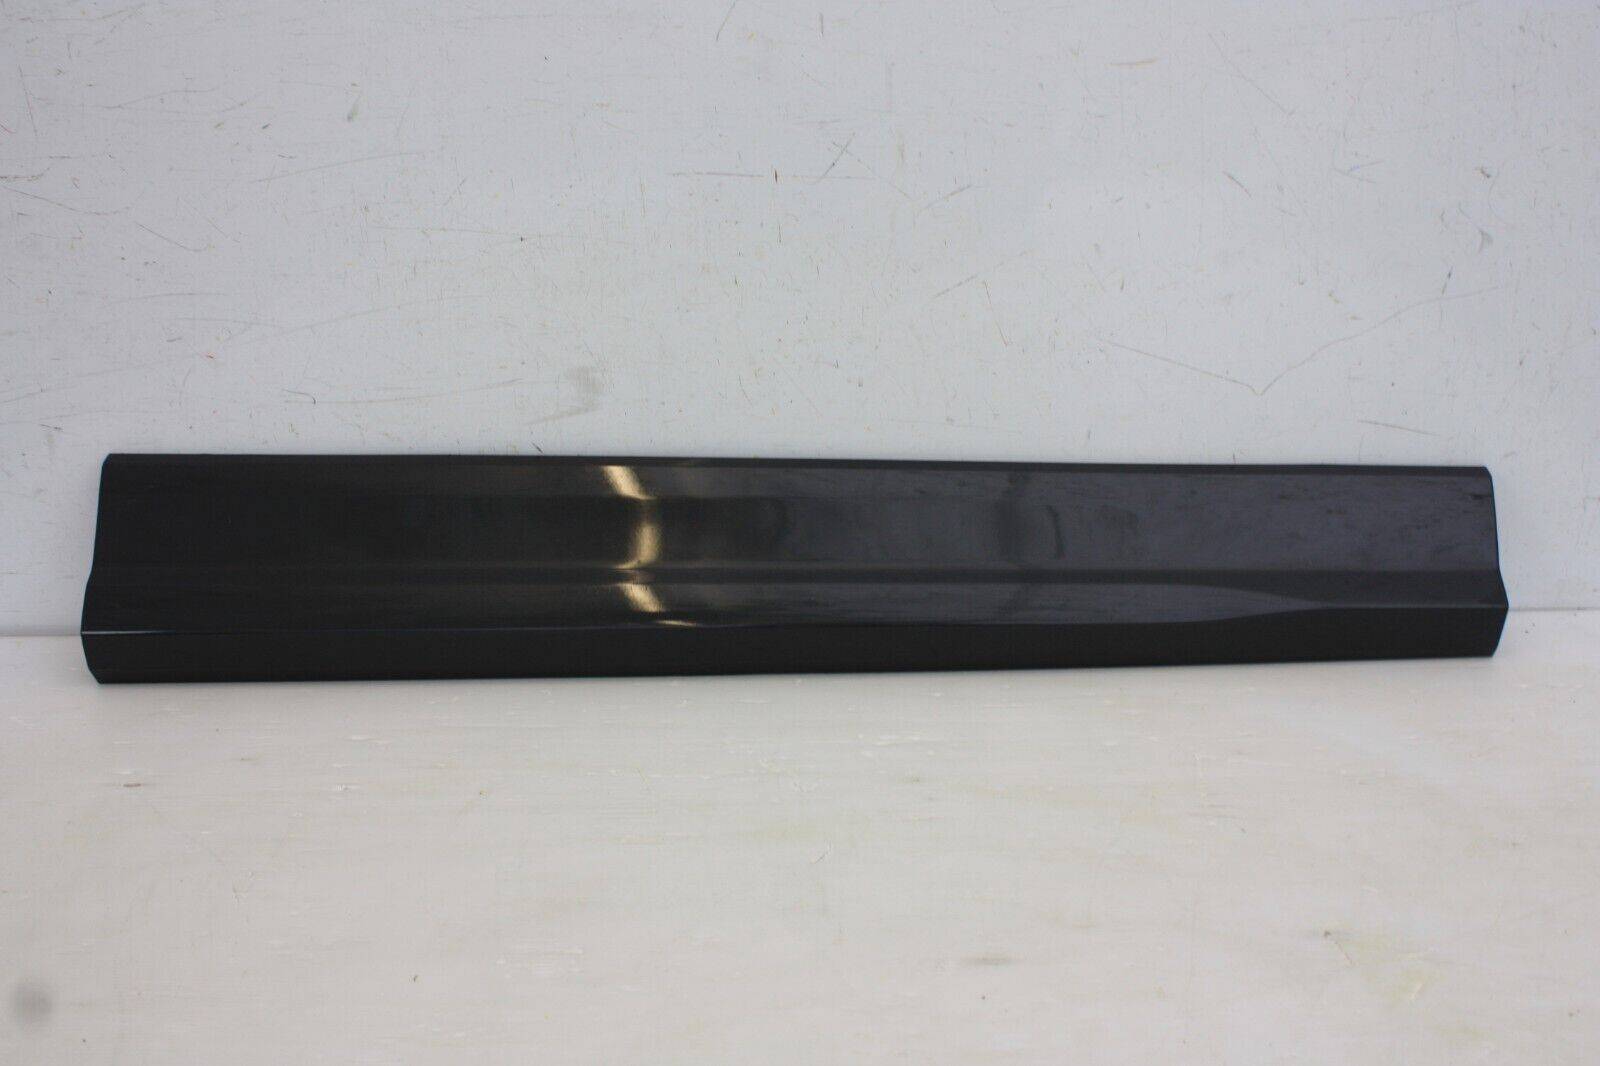 Audi Q2 Front Right Side Door Moulding 81A853960B Genuine 175889303549